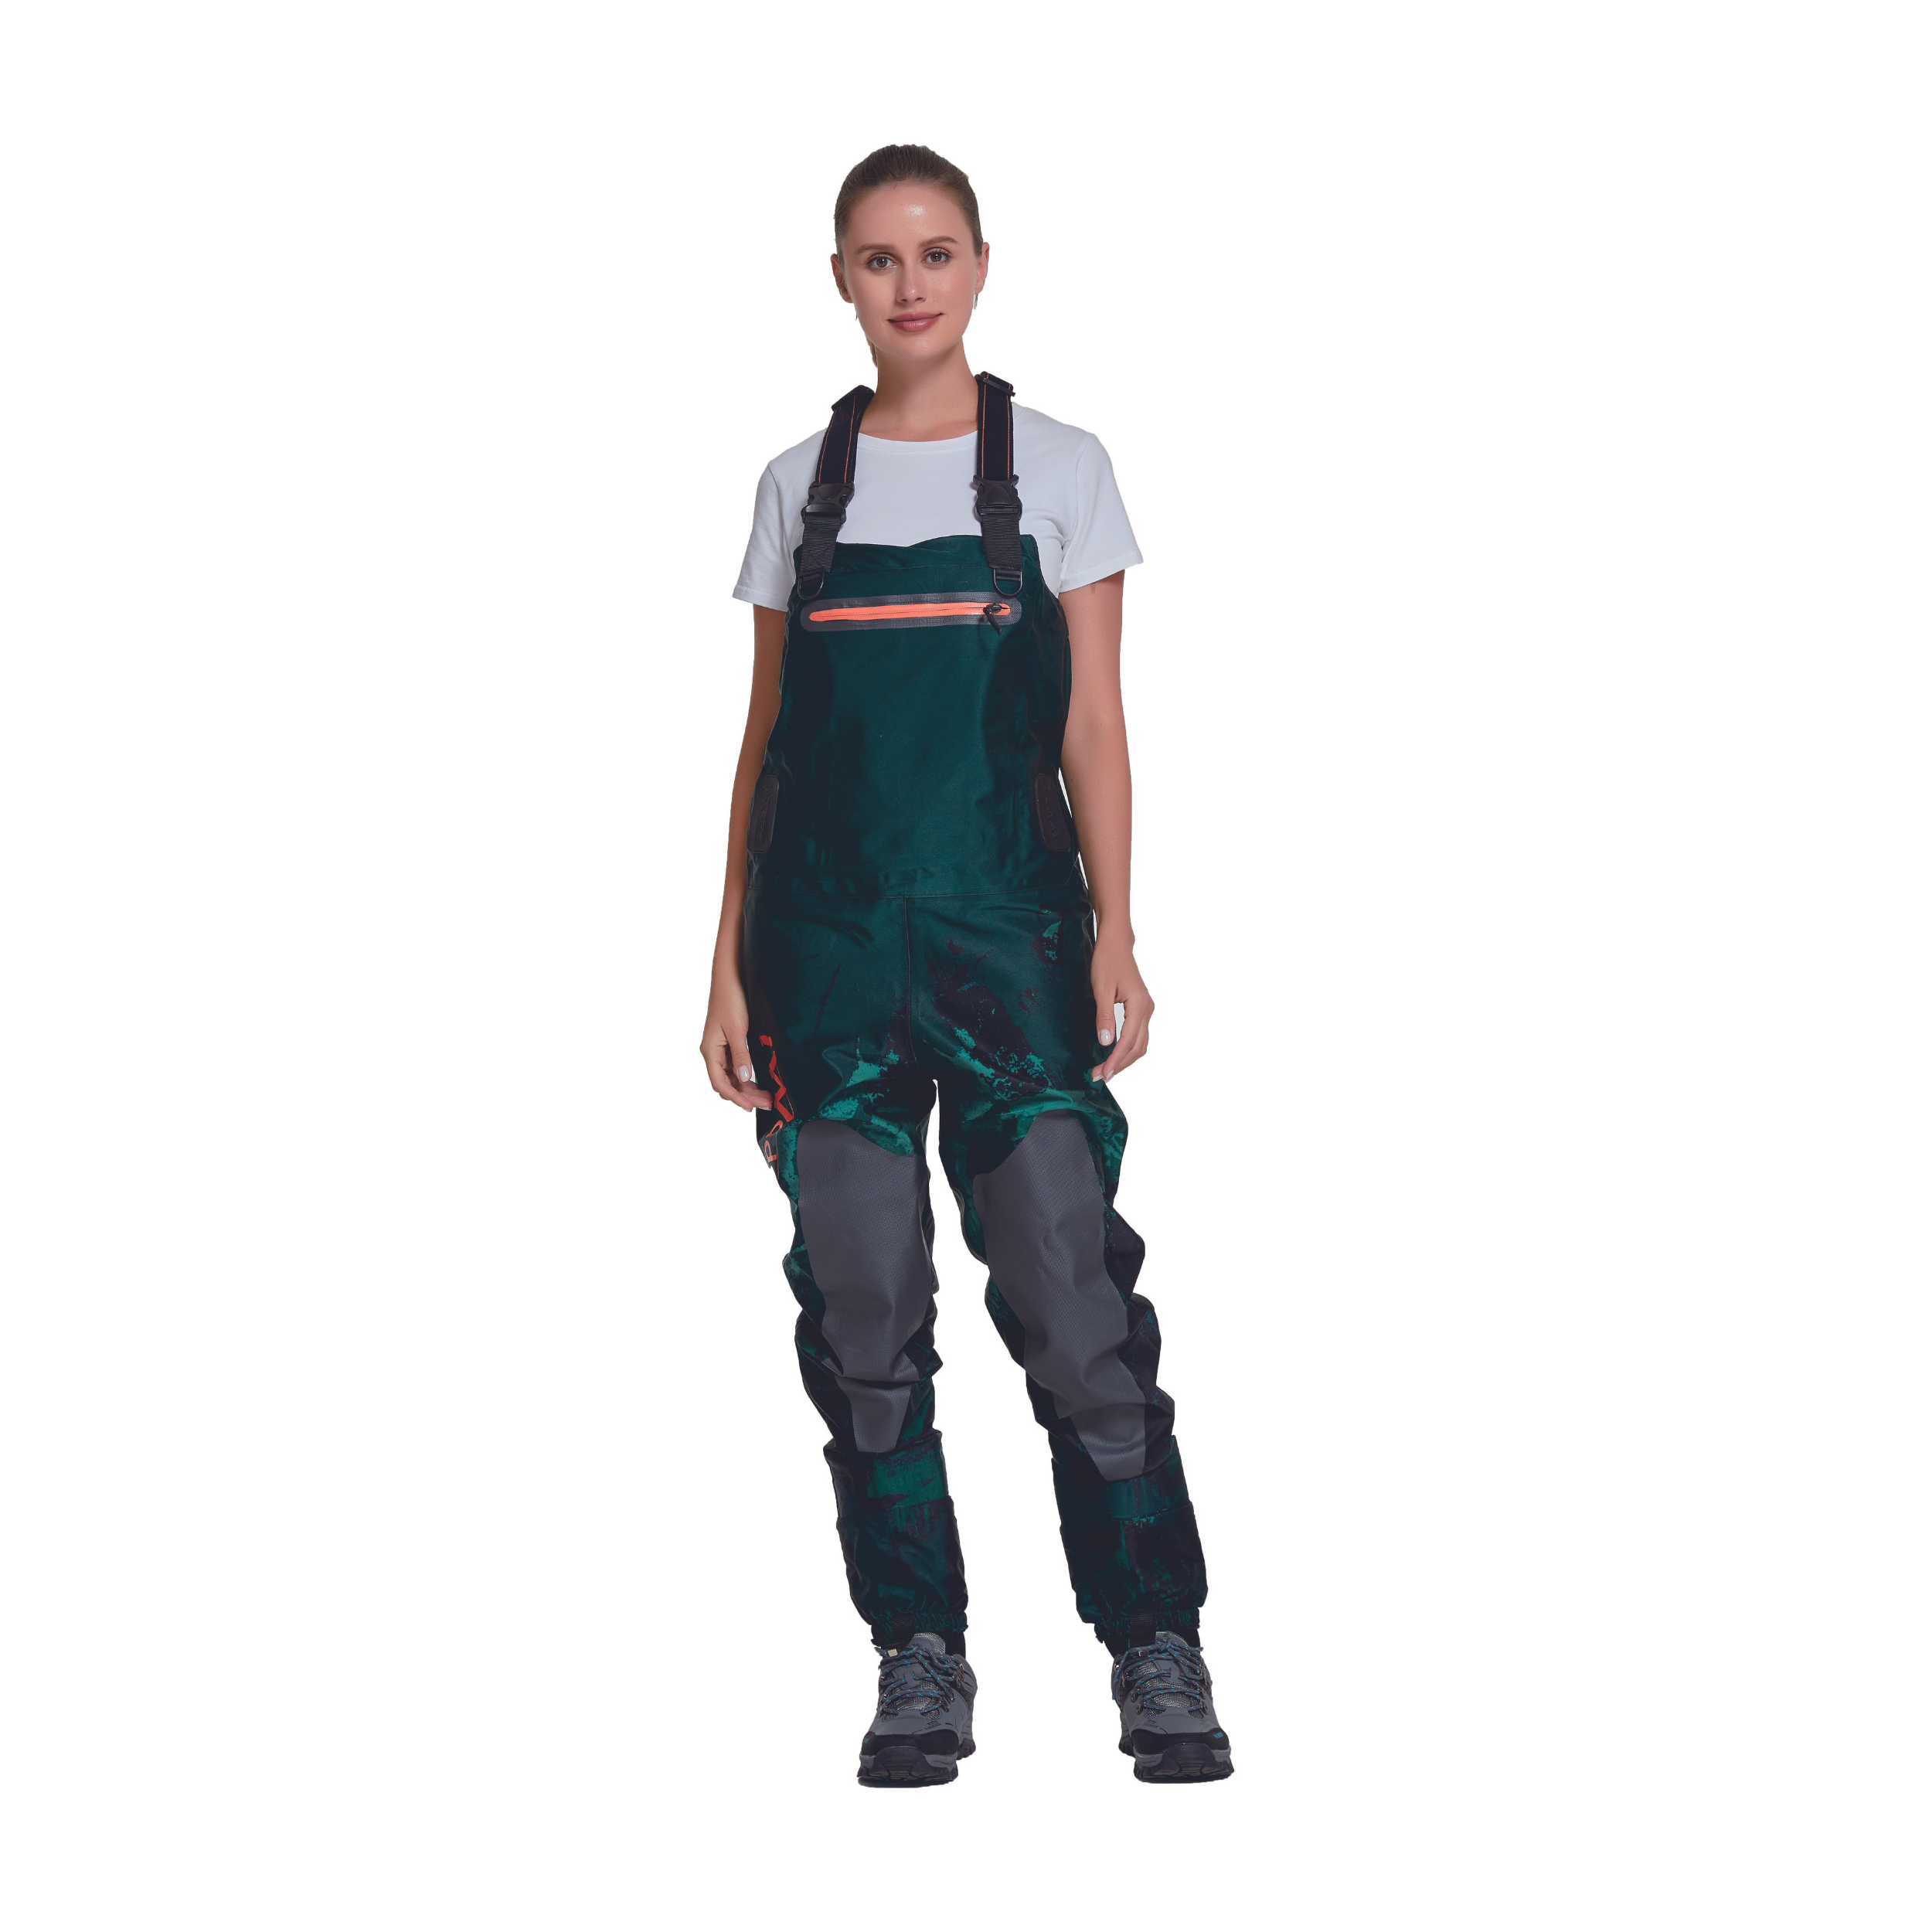 Women fishing in hip waders Stock Photos - Page 1 : Masterfile